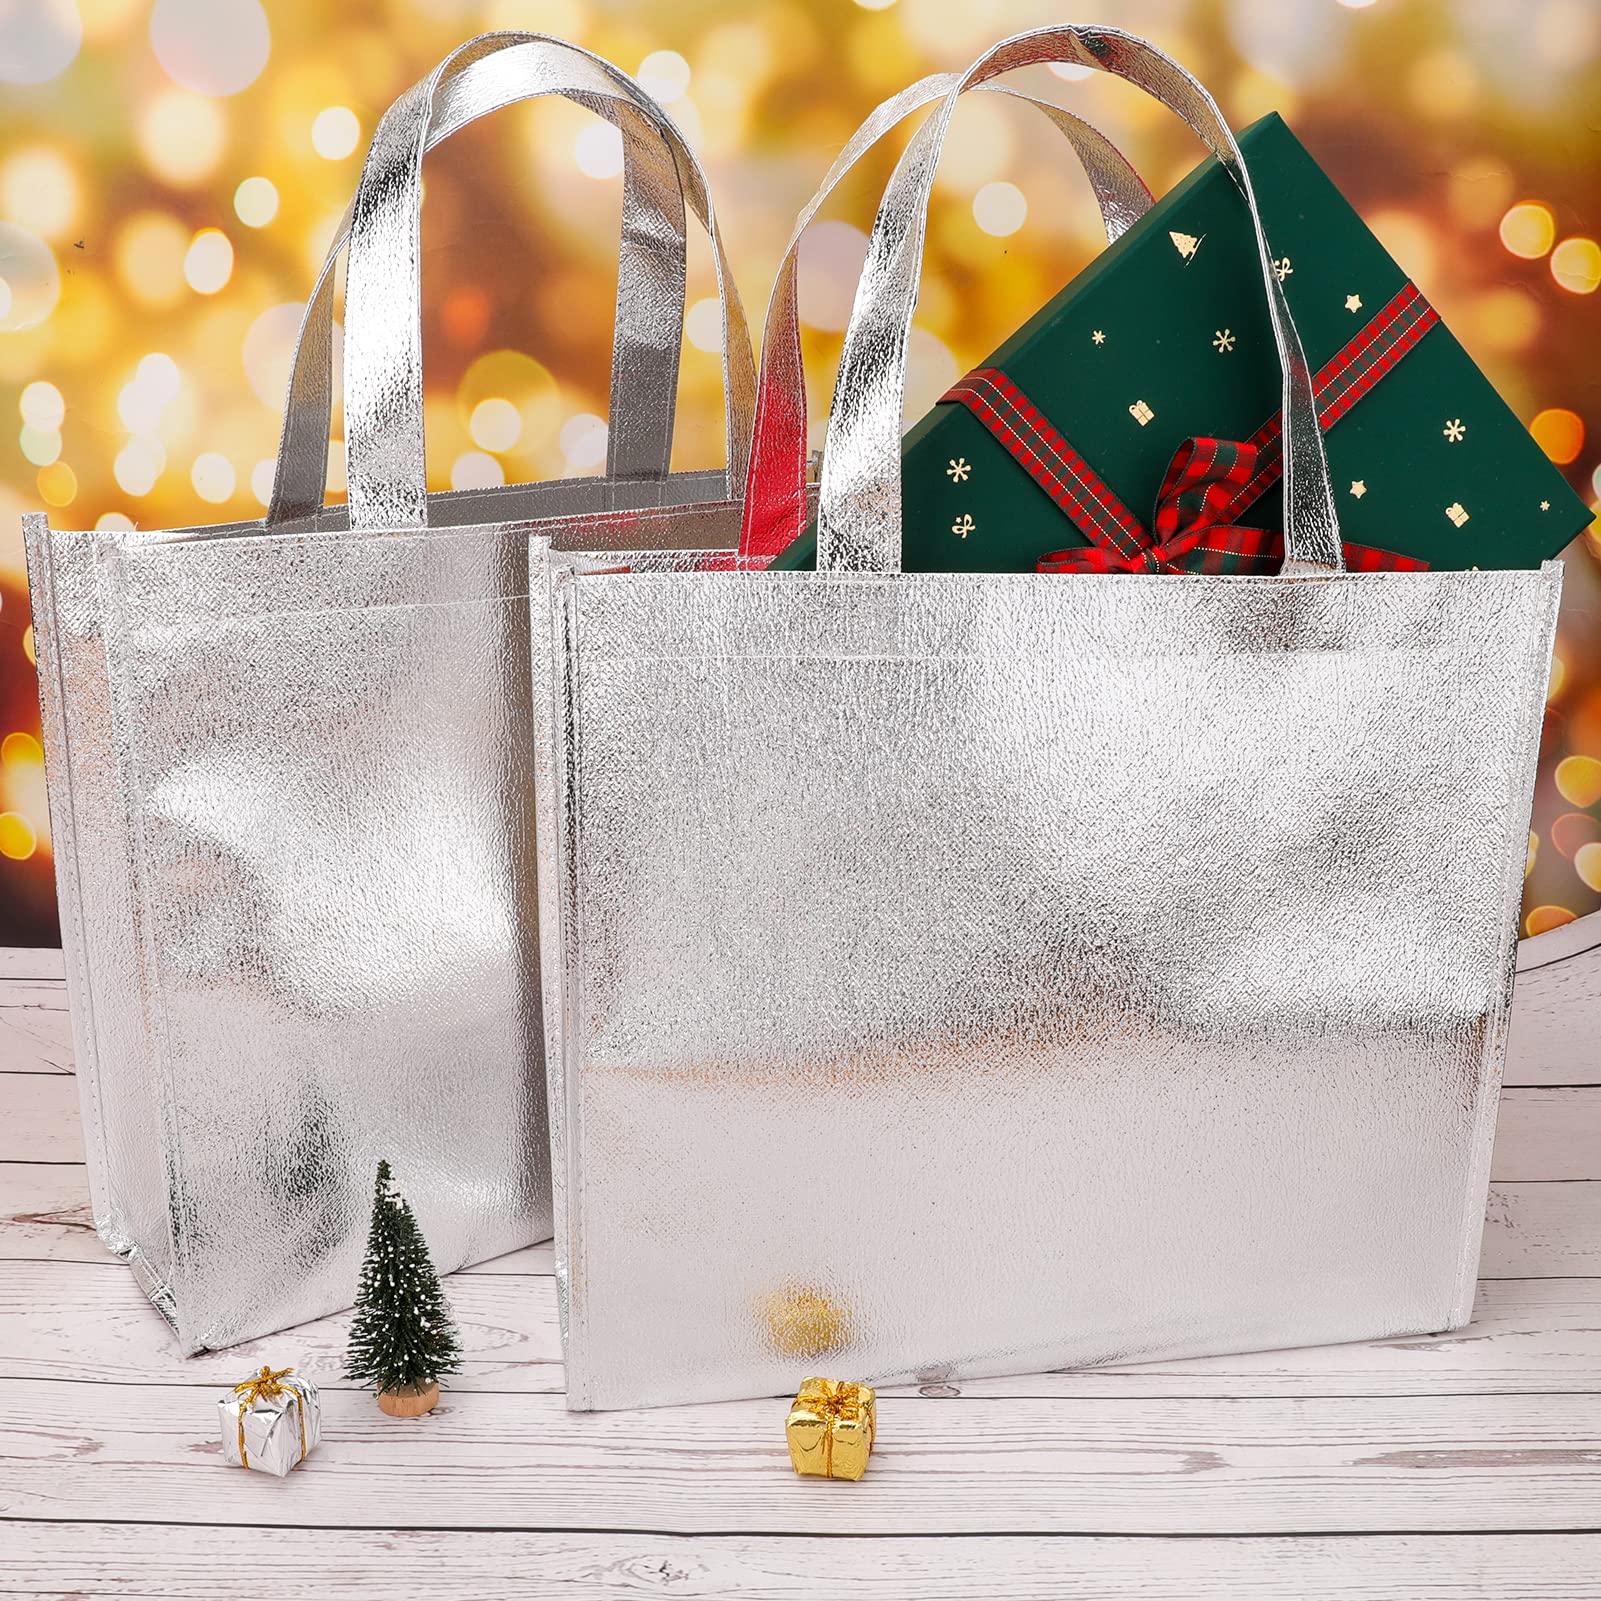 PHOGARY 12 Large Gift Bags with Handles (Silver), Stylish Tote Bags for Birthday Wedding Party Favor Christmas Wrap, Reusable Glossy Grocery Bags, non-woven fabric